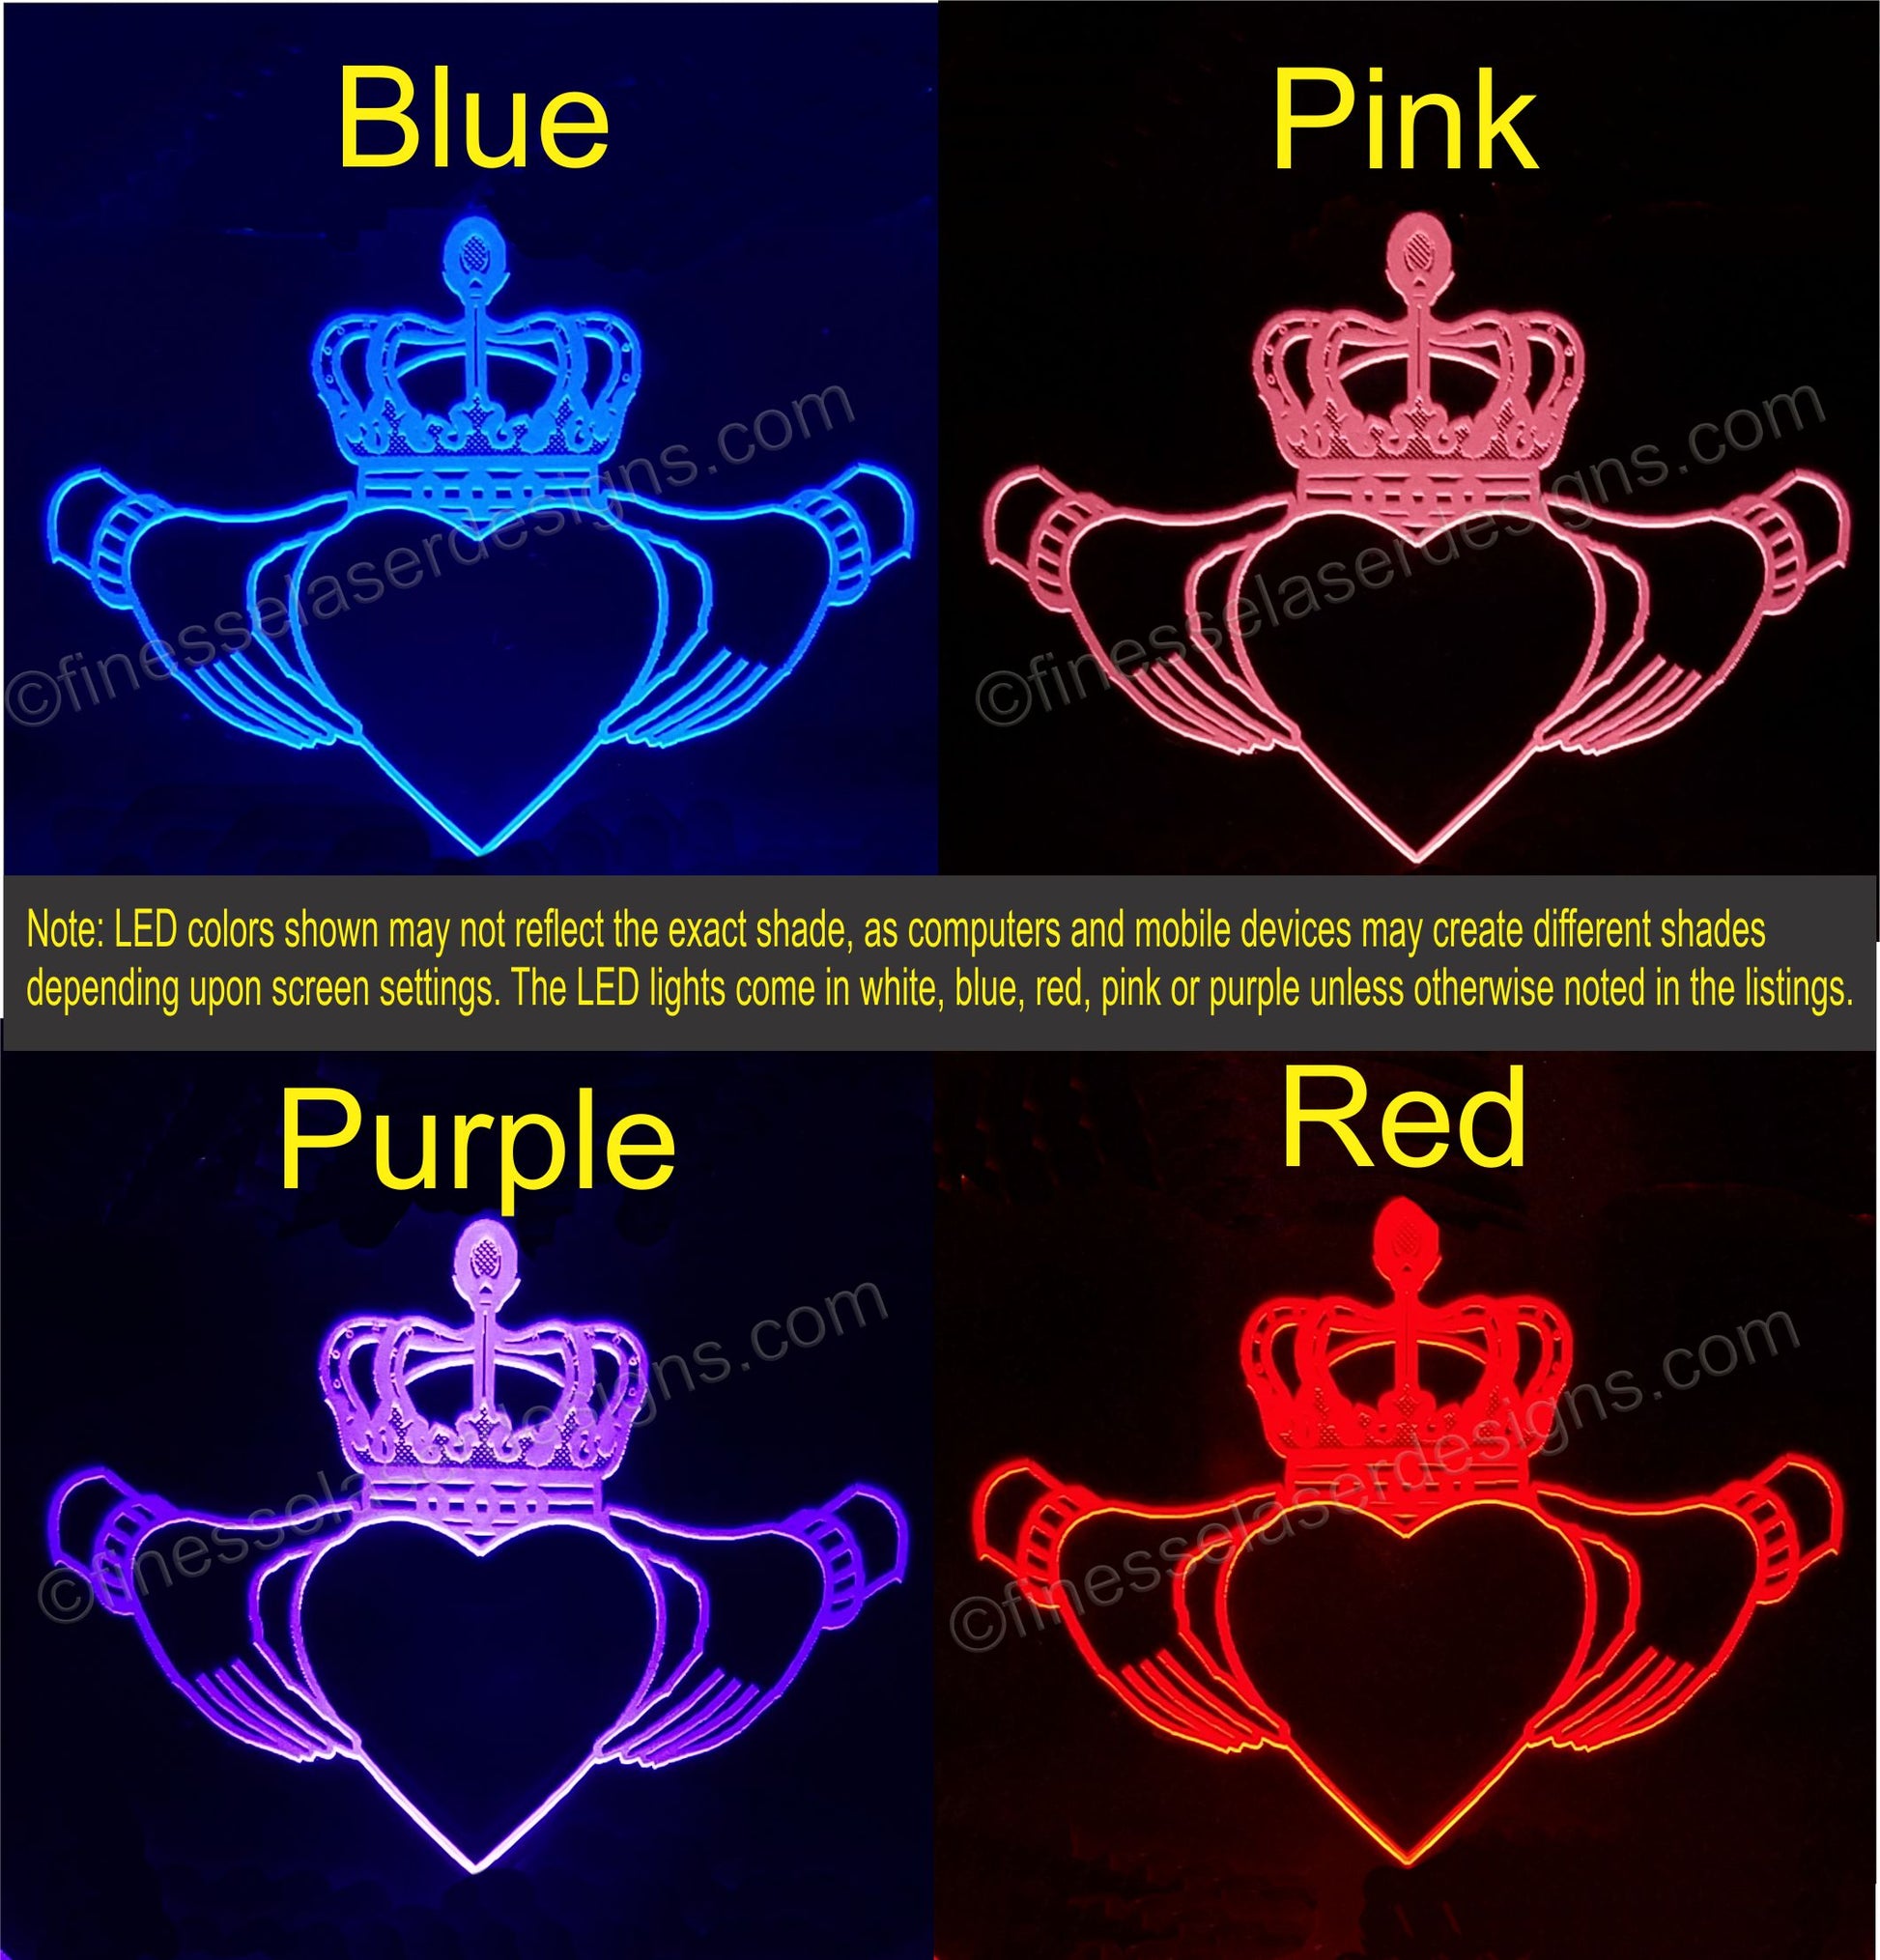 Claddagh symbol shown lighted up in LED lights, in blue, pink, purple, and red